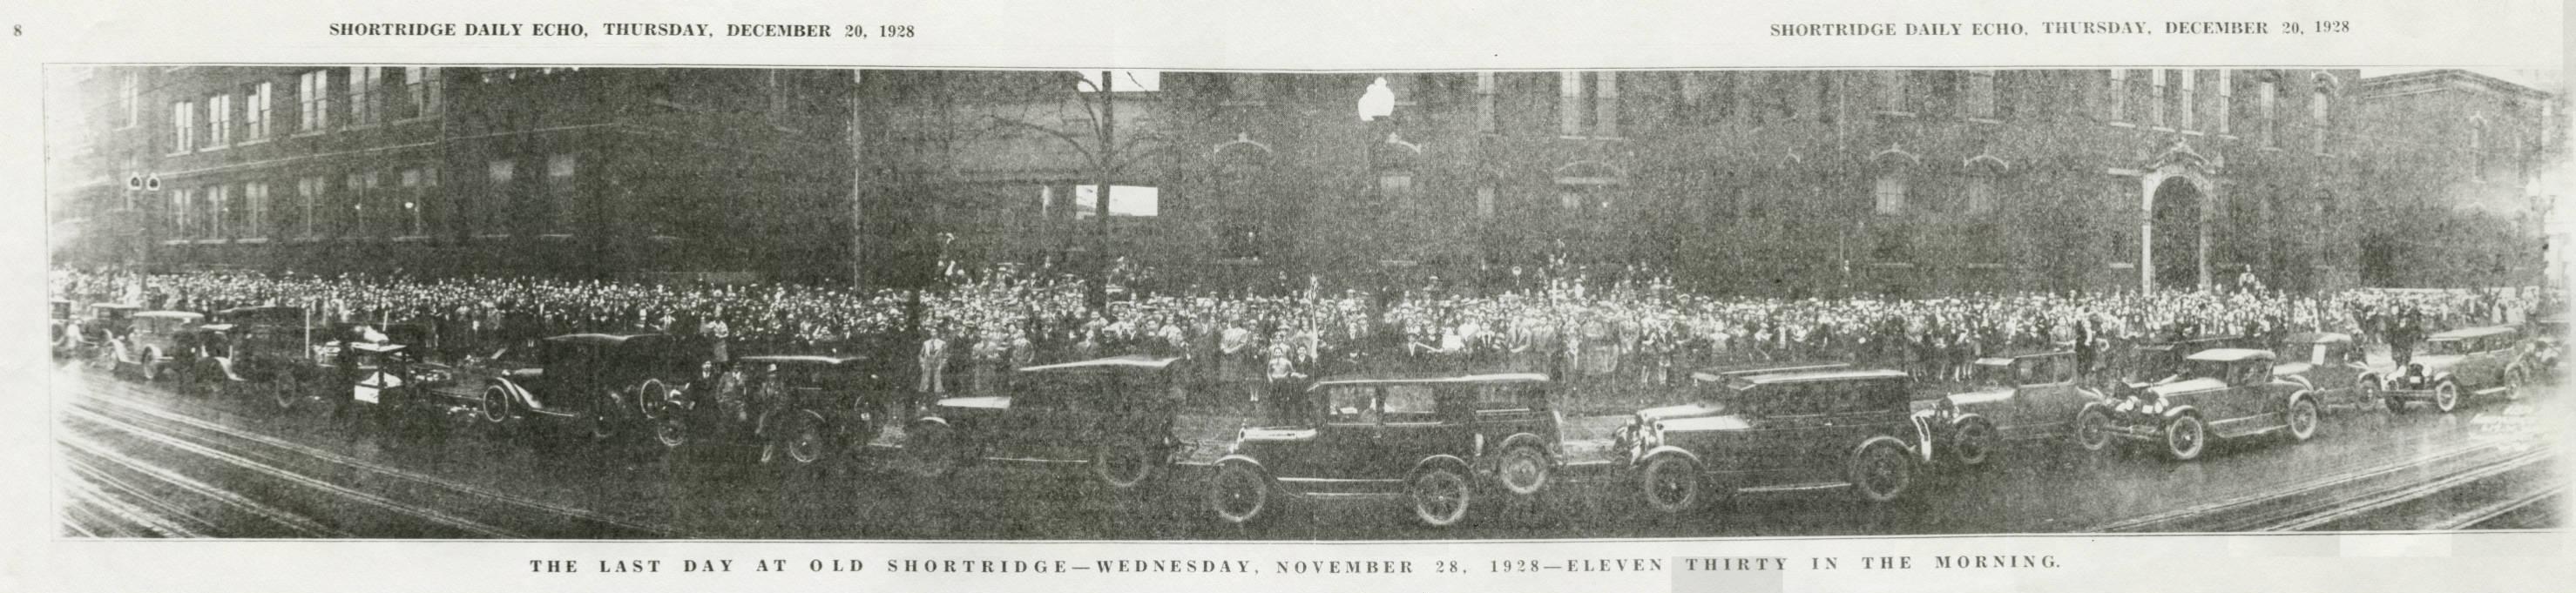 A large crowd of people fill out the yard in front of a large brick school. Cars line the street in front of the crowd.